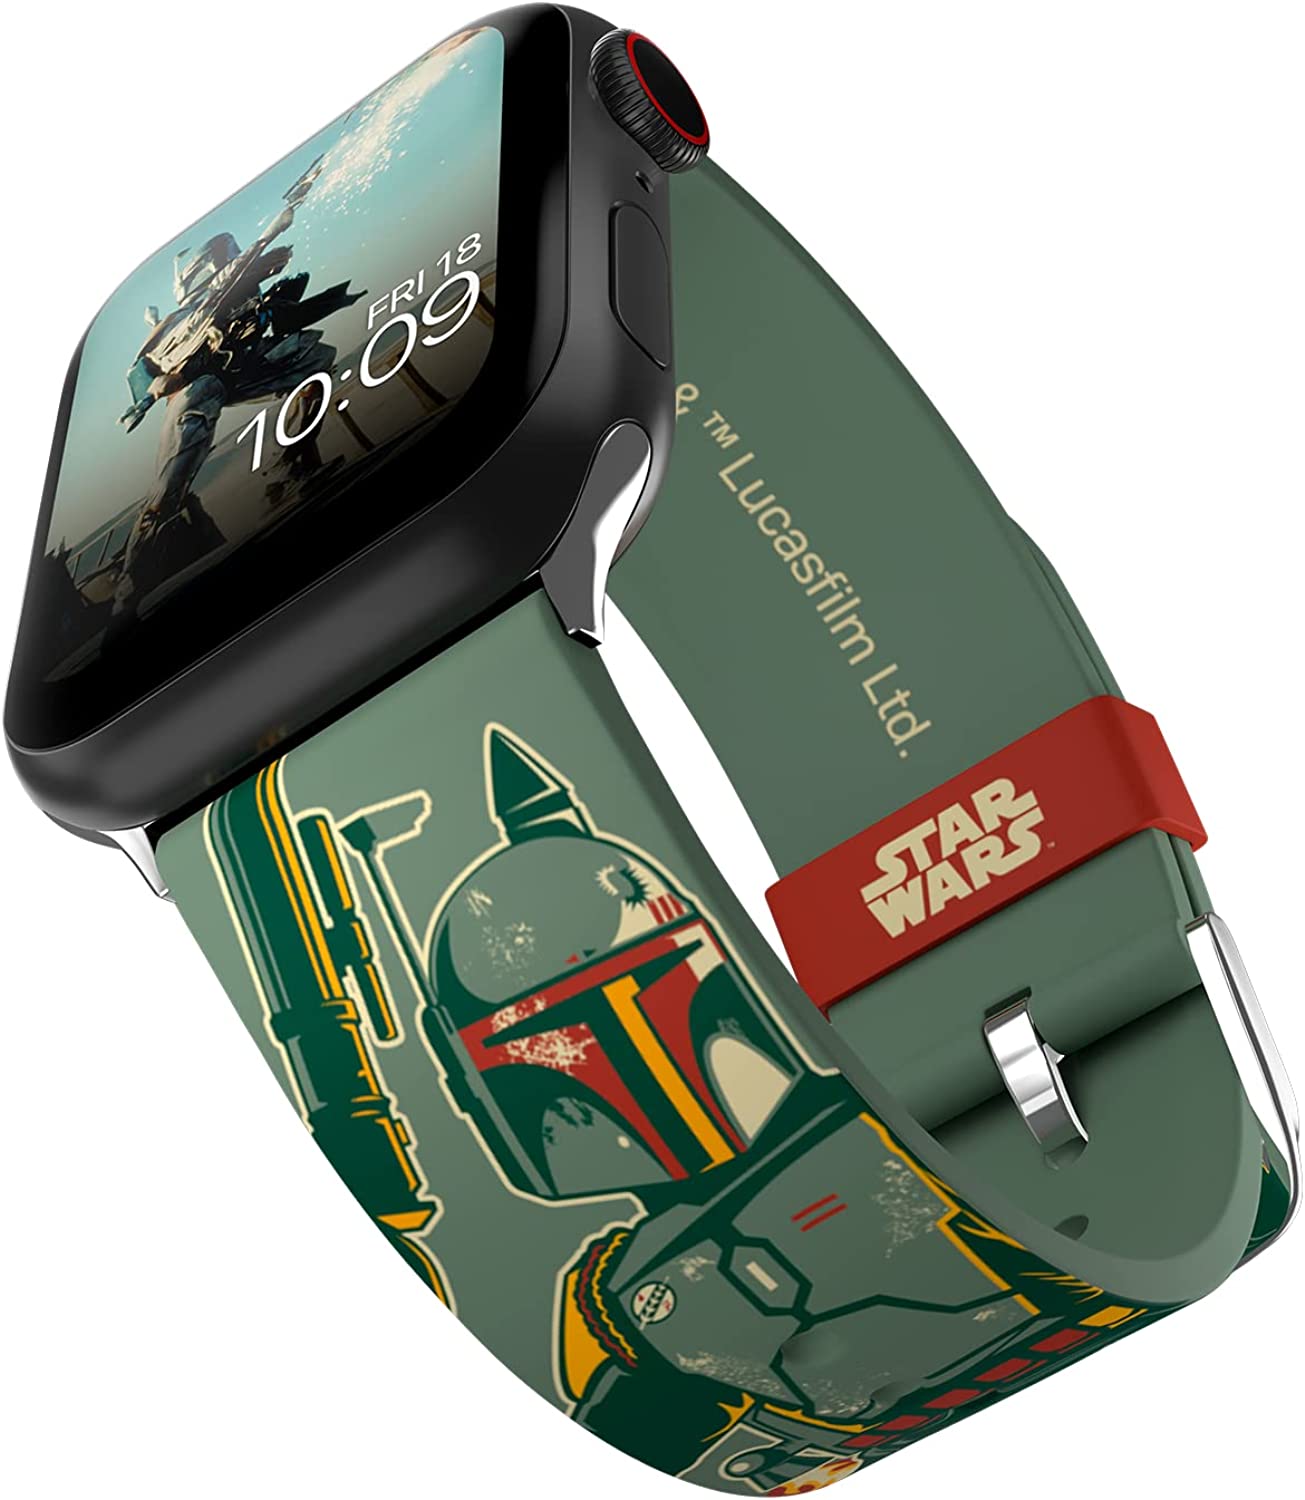 Star Wars: Boba Fett Smartwatch Band – Officially Licensed, Compatible with Every Size & Series of Apple Watch (watch not included)